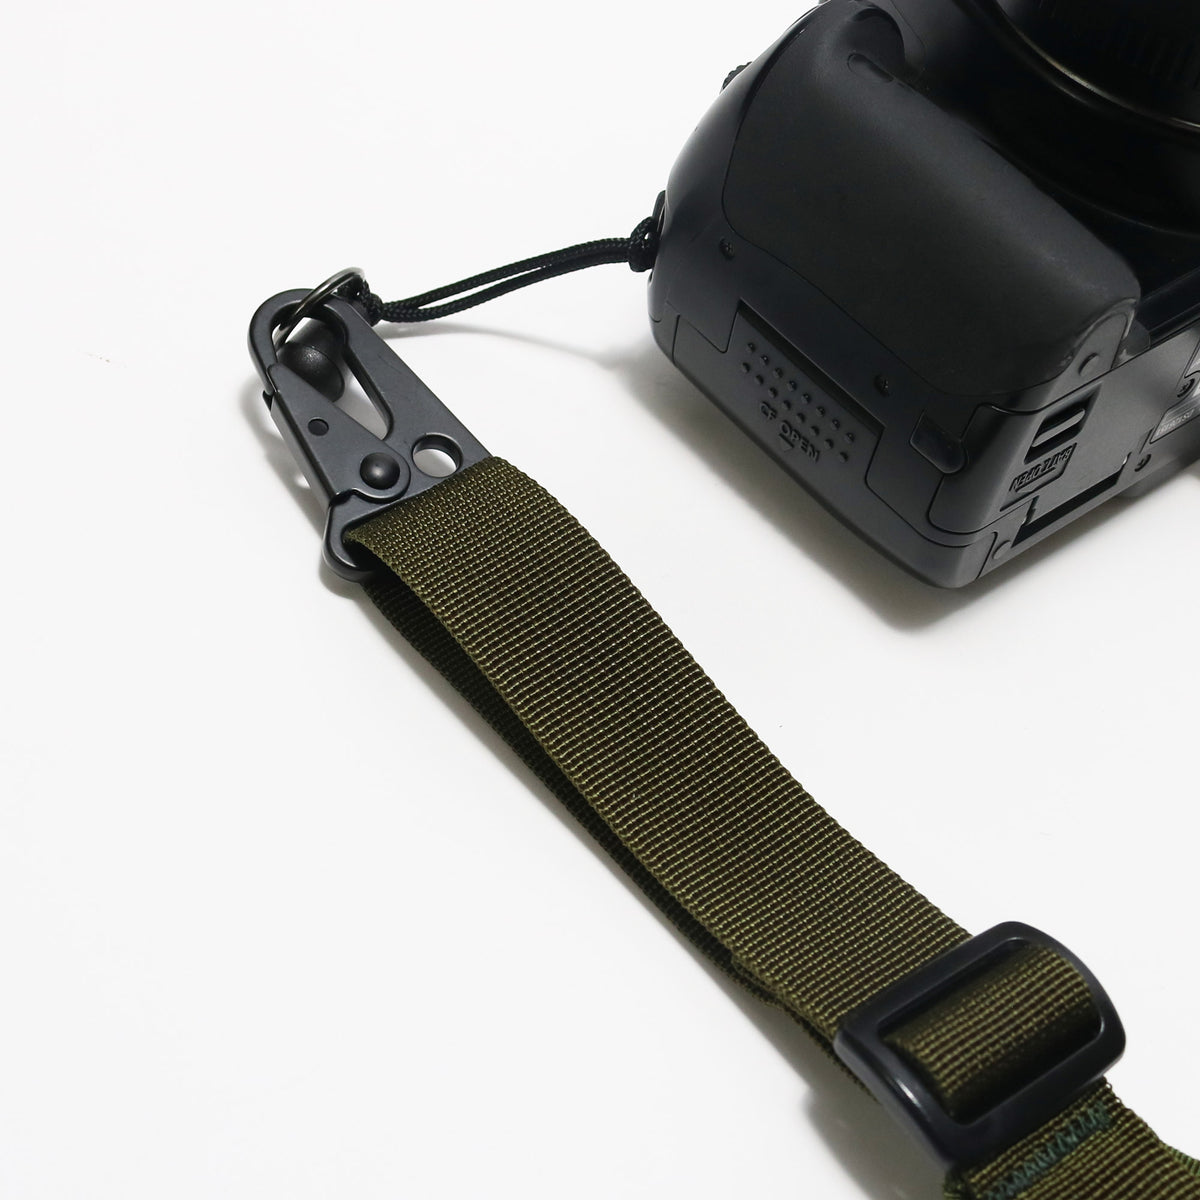 skingrowsback 3Point Cycling Camera Strap Olive Made in Australia